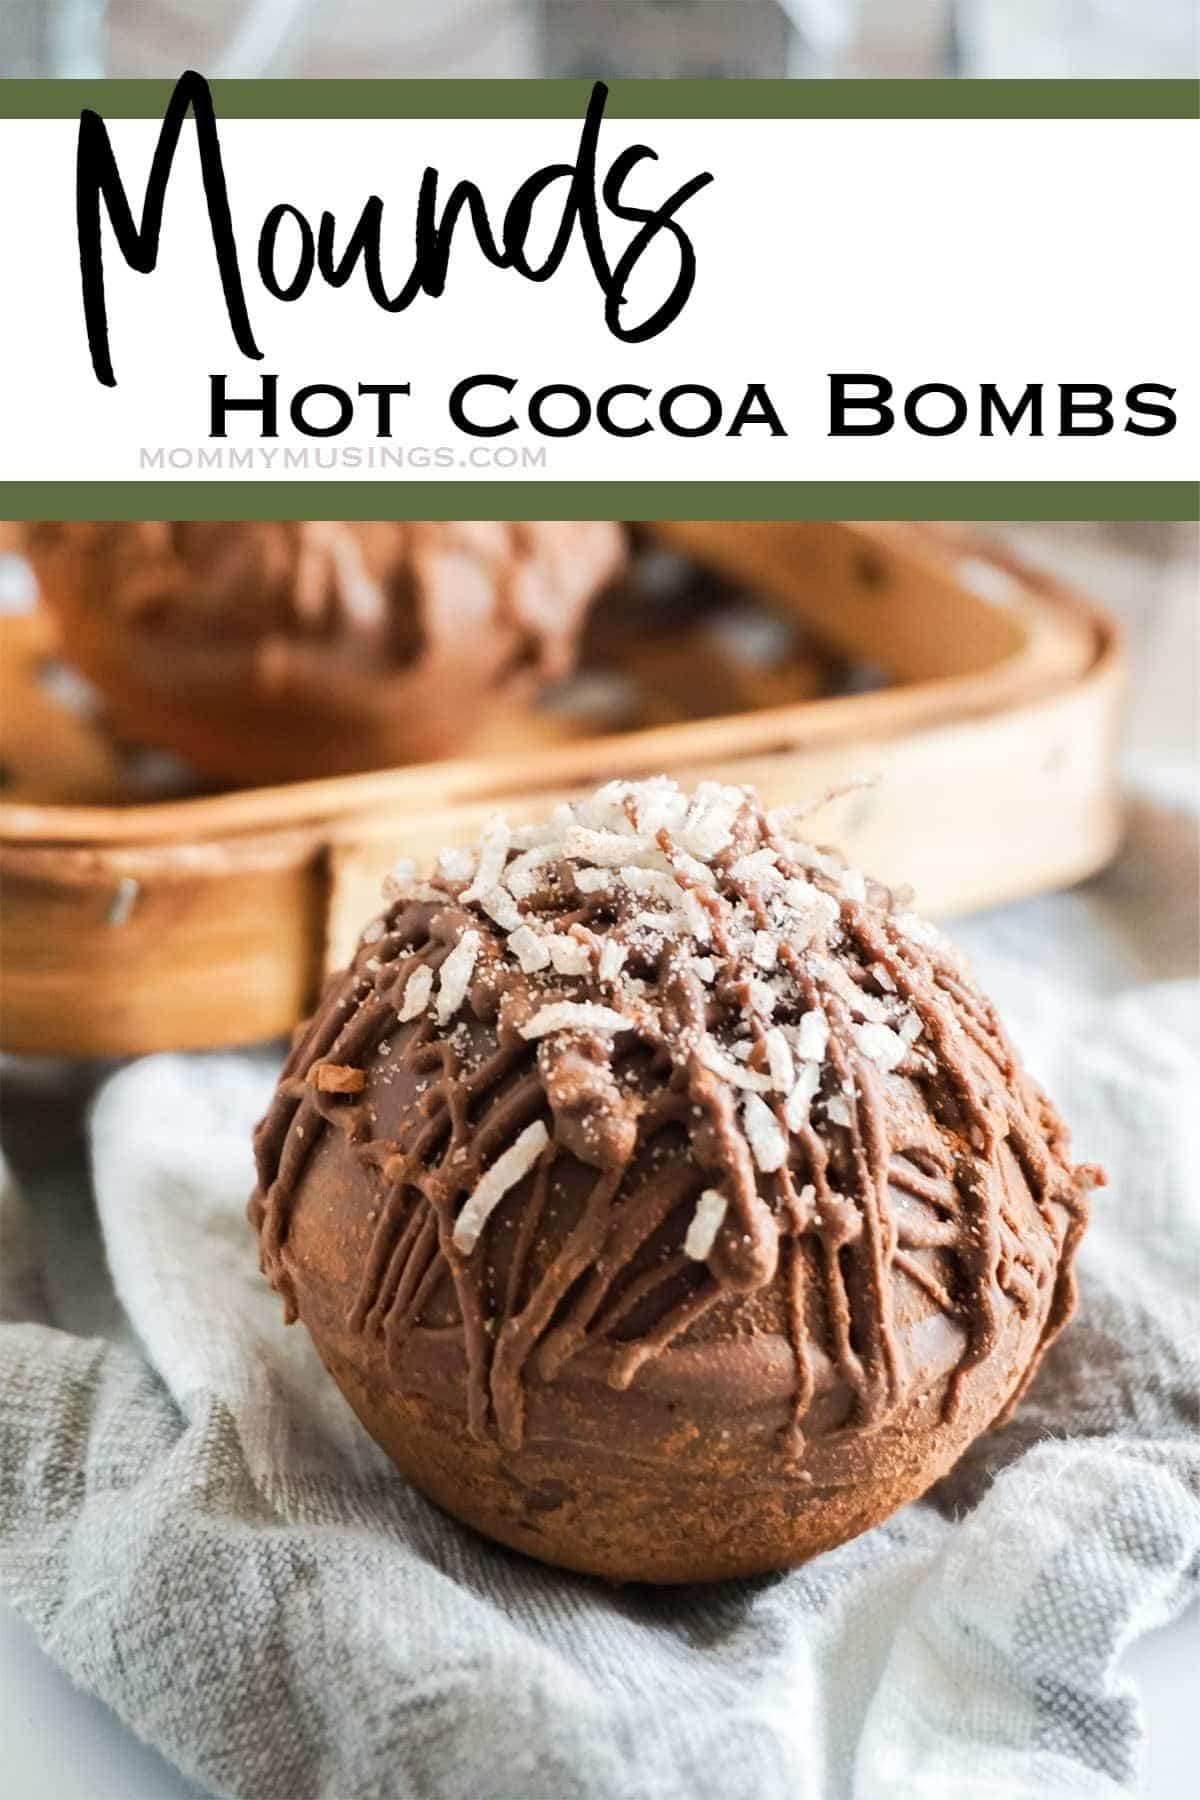 Mounds hot cocoa bomb